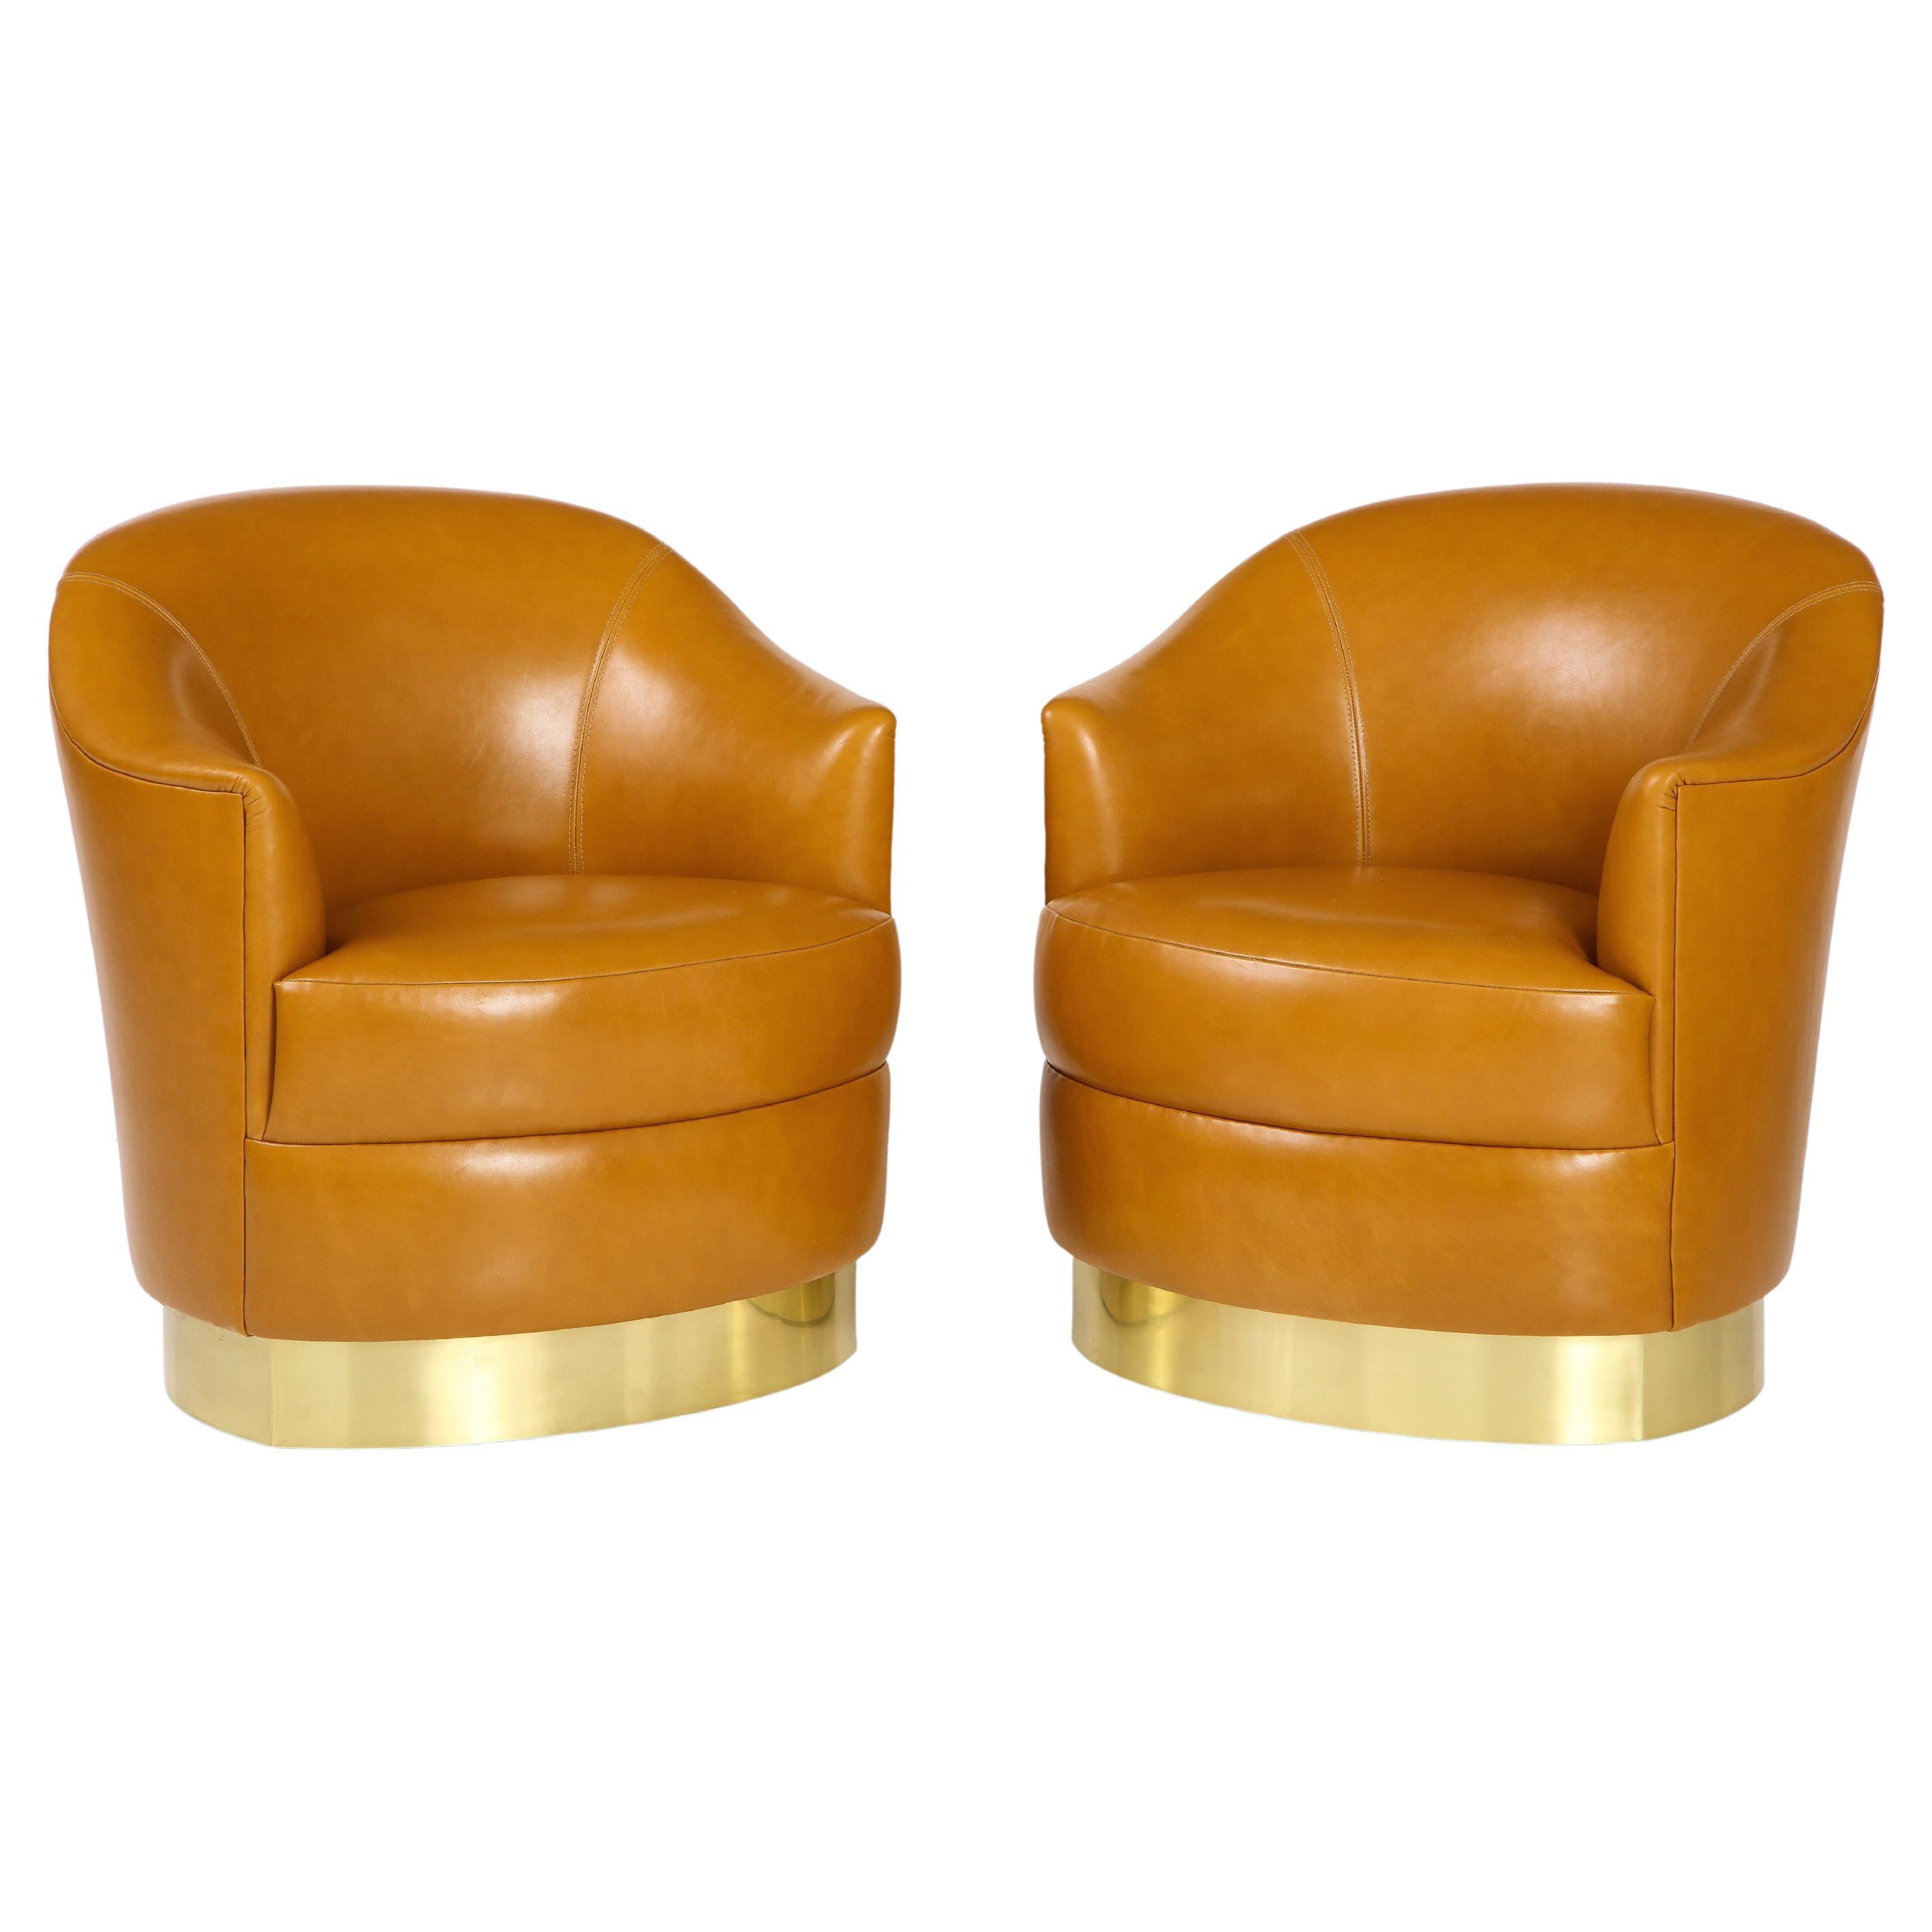 Karl Springer Rare Pair of Saddle Leather Club Chairs, USA, 1980s